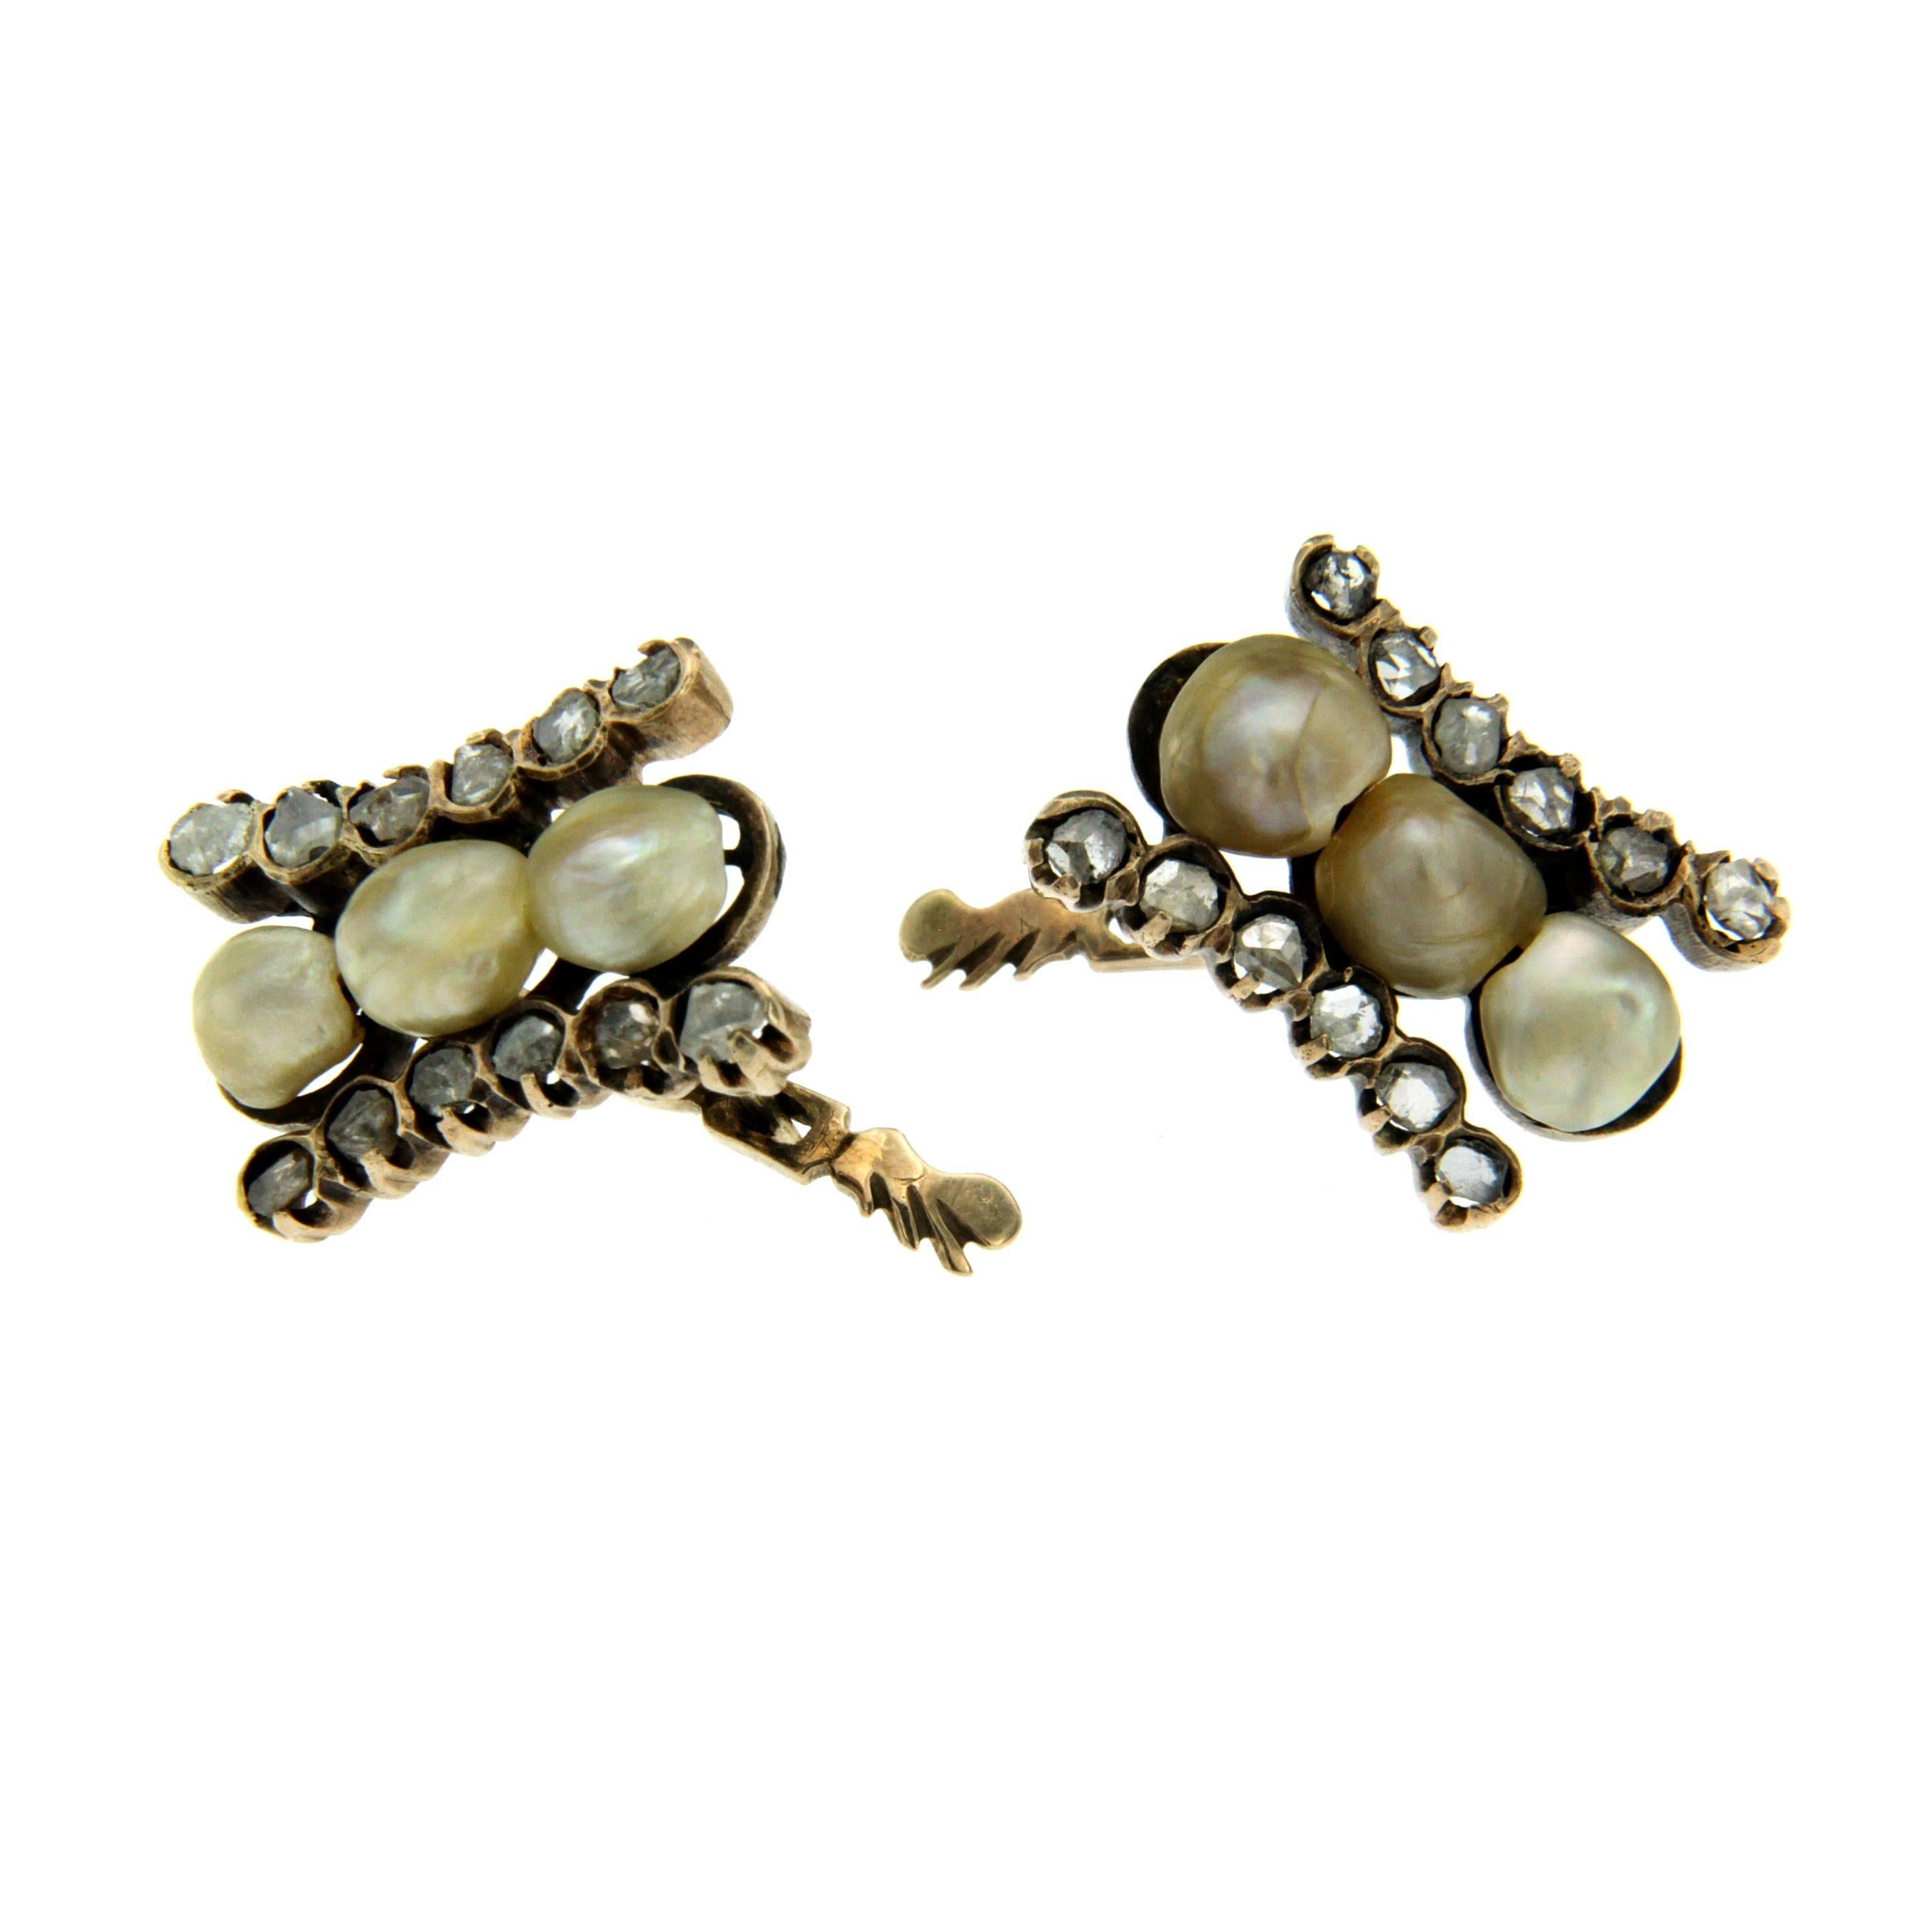 Antique 12k gold earrings authentic from 1800's period.
The Earrings are mounted with natural pearls weighing 1.50 grams and  approx. 0.40 carat of rose cut Diamonds.

CONDITION: Pre-owned - Excellent 
METAL: 12k Gold 
STONE: Diamond 0.40 total